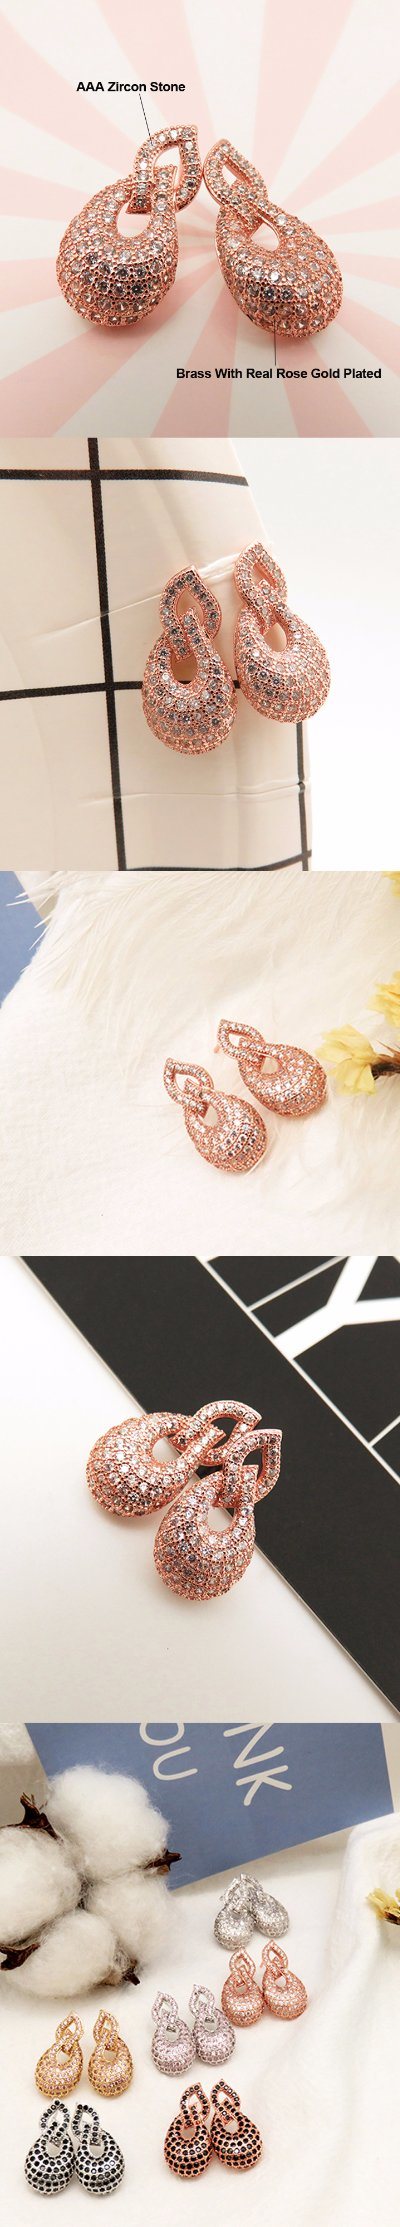 Fashion Jewelry Zirconia Stone Earring Stud with Rose Gold Plated